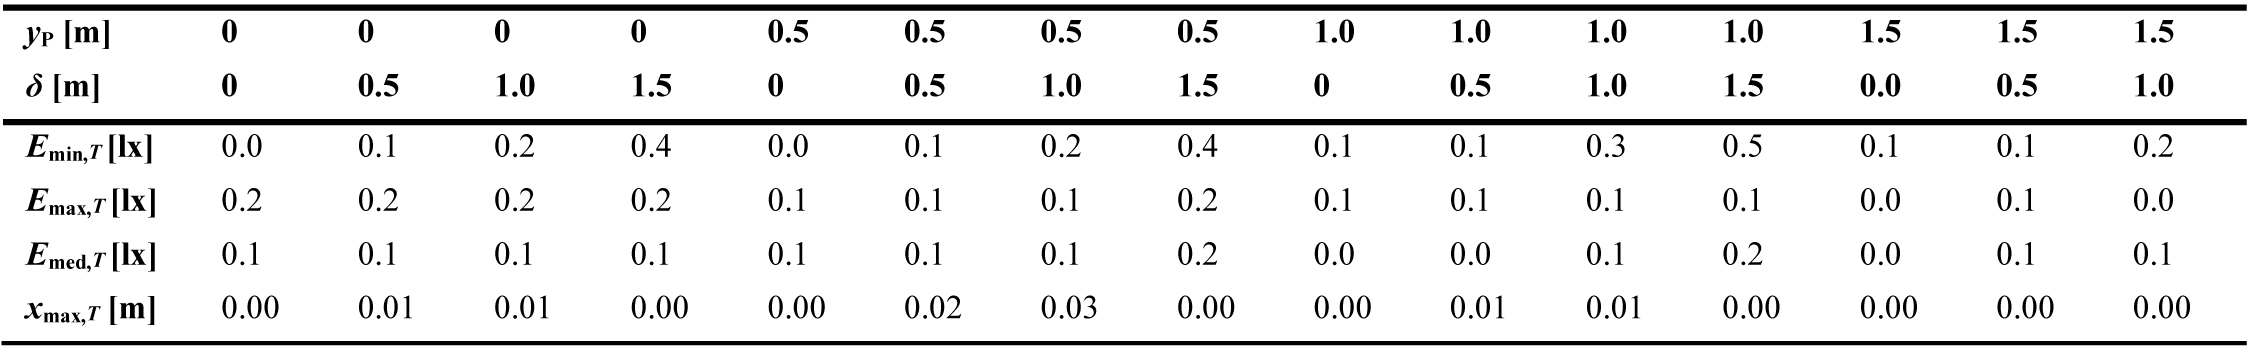 Absolute differences between the largest and smallest values of Emin,T, Emax,T, Emed,T, and xmax,T obtained with the four approaches in the configuration with BZ1 LID type.